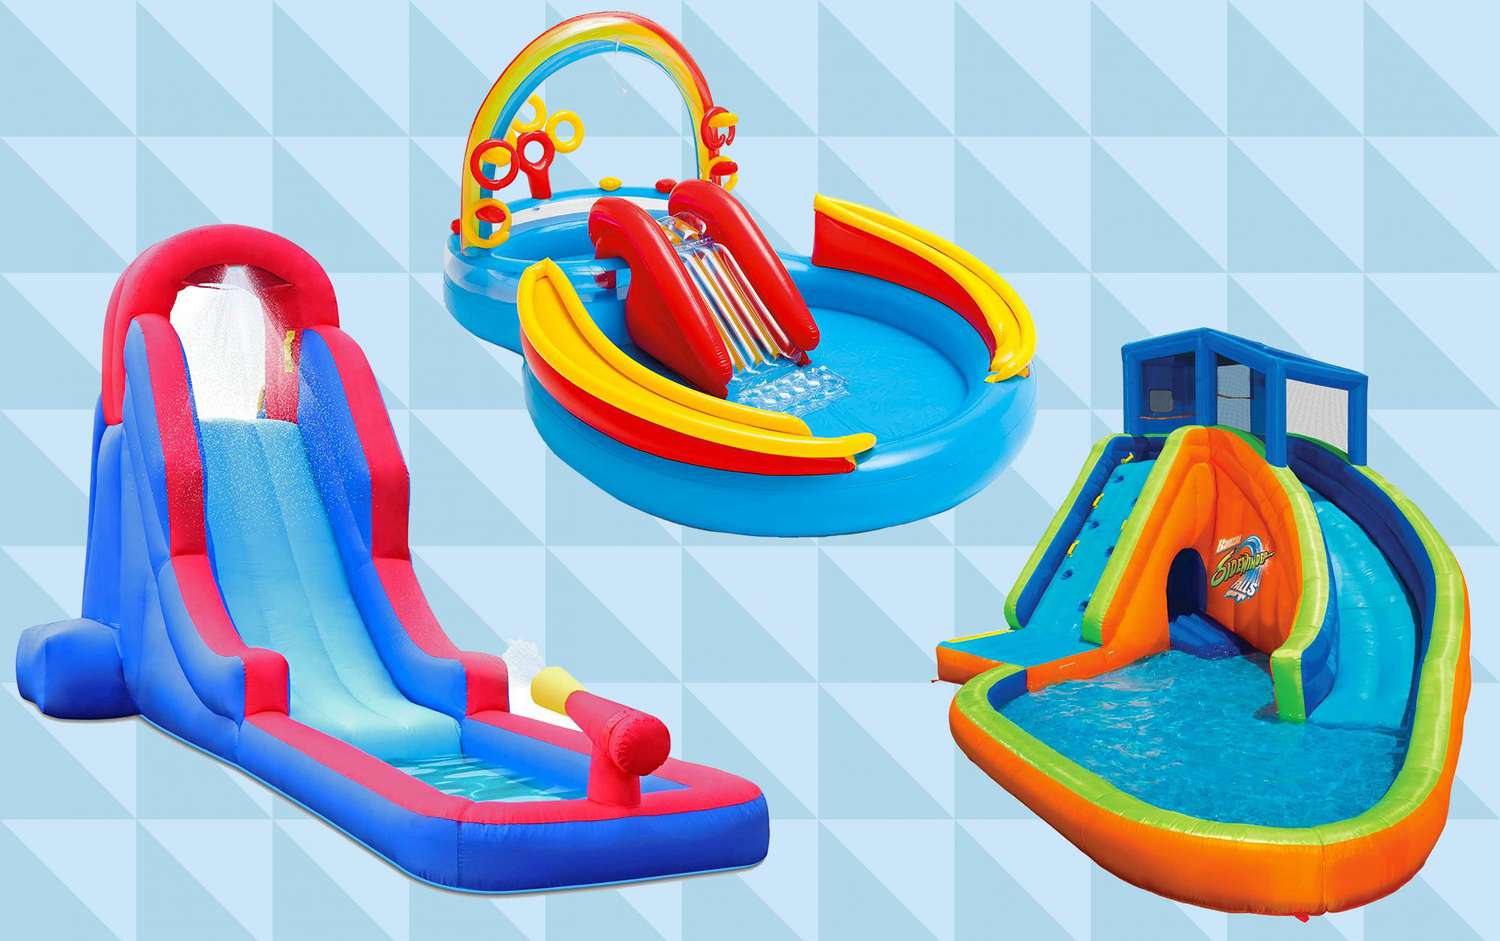 8 Best Inflatable Water Slides For Kids, How To Make A Slide For An Above Ground Pool